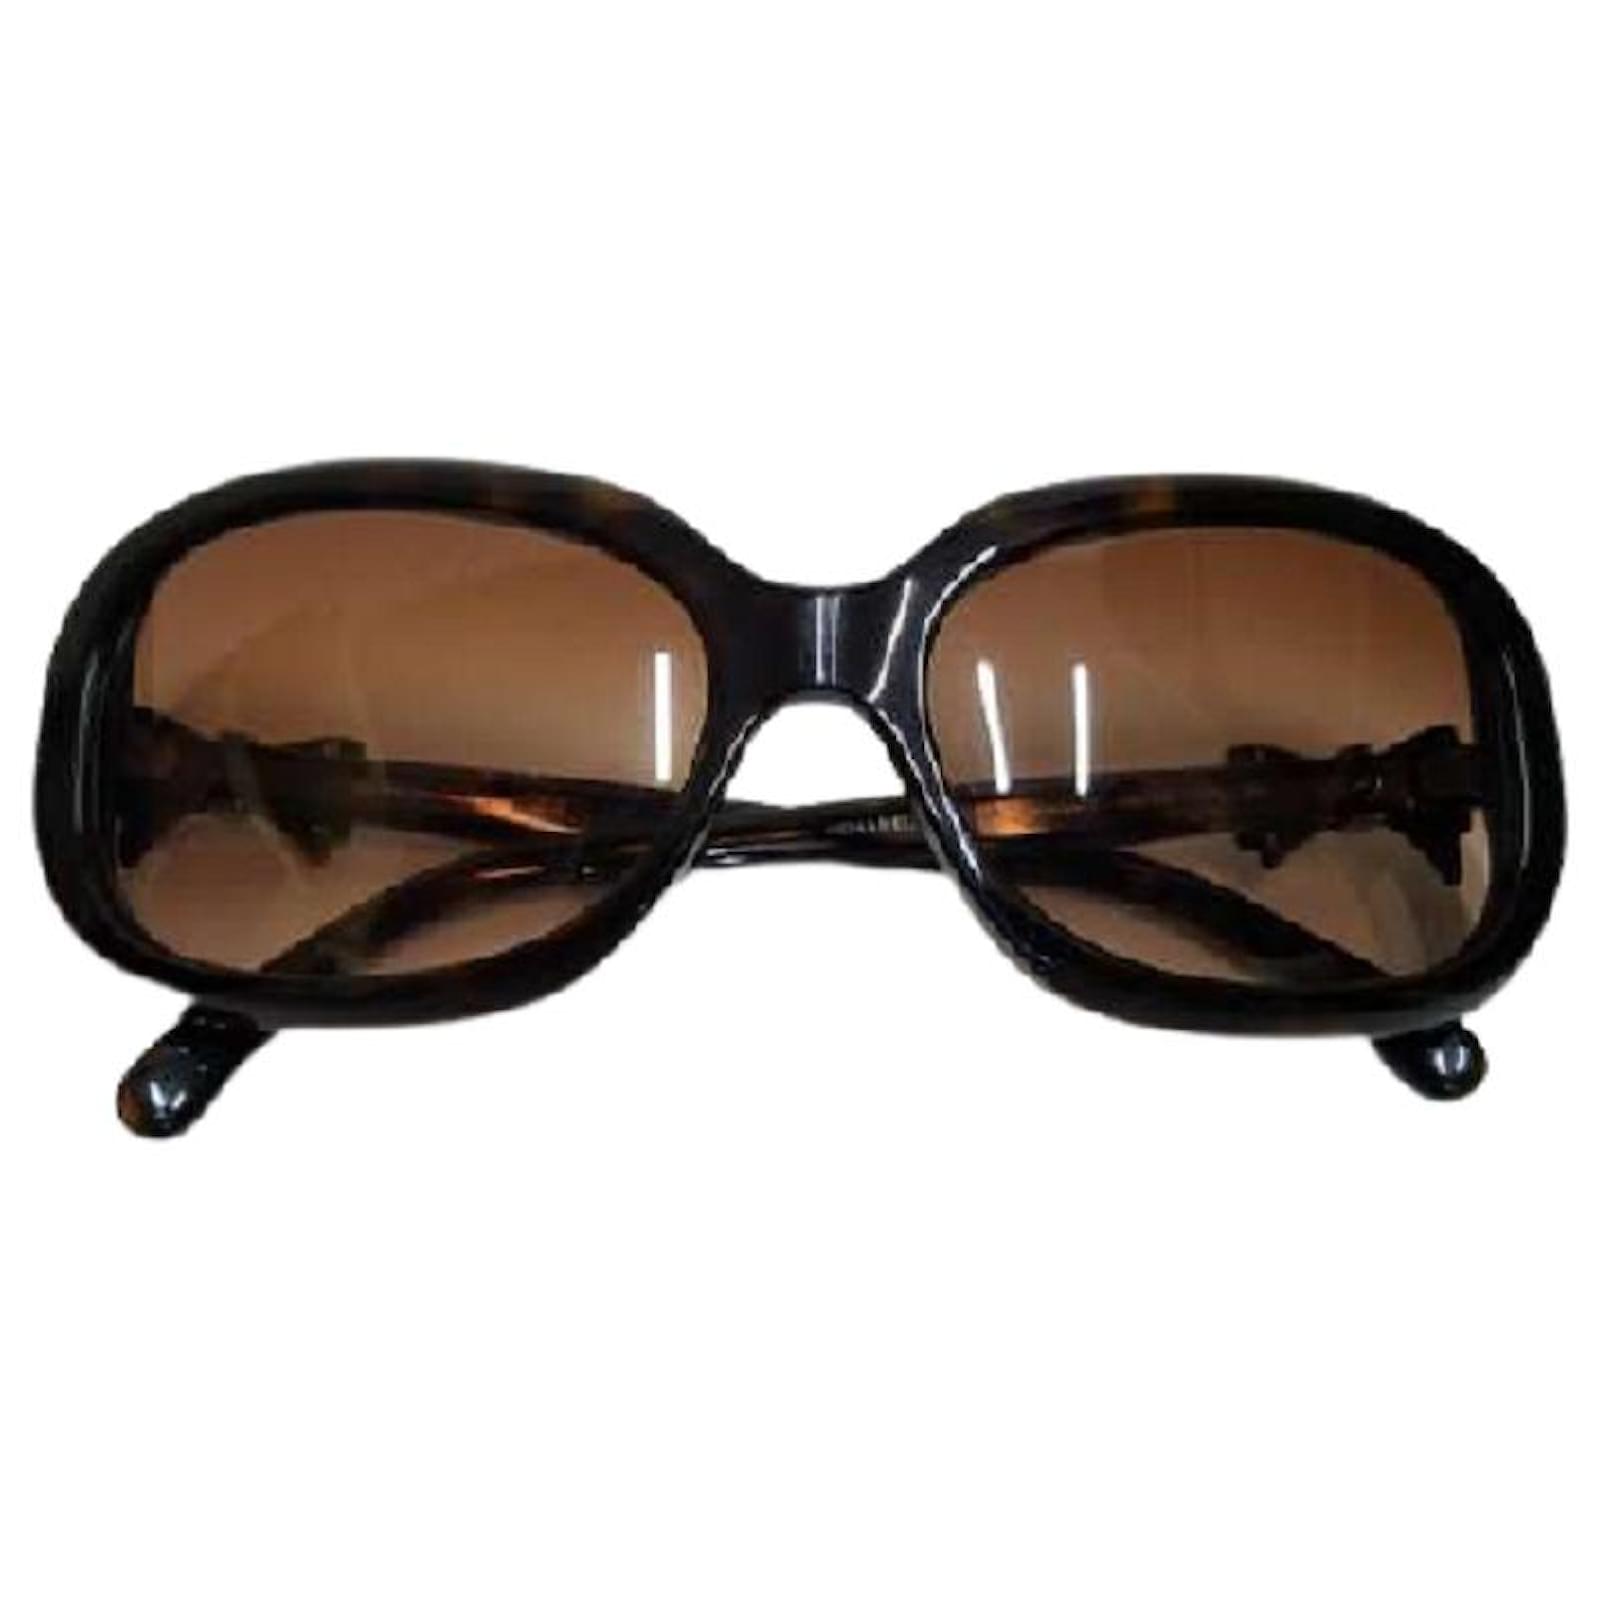 Buy designer Sunglasses by chanel at The Luxury Closet.